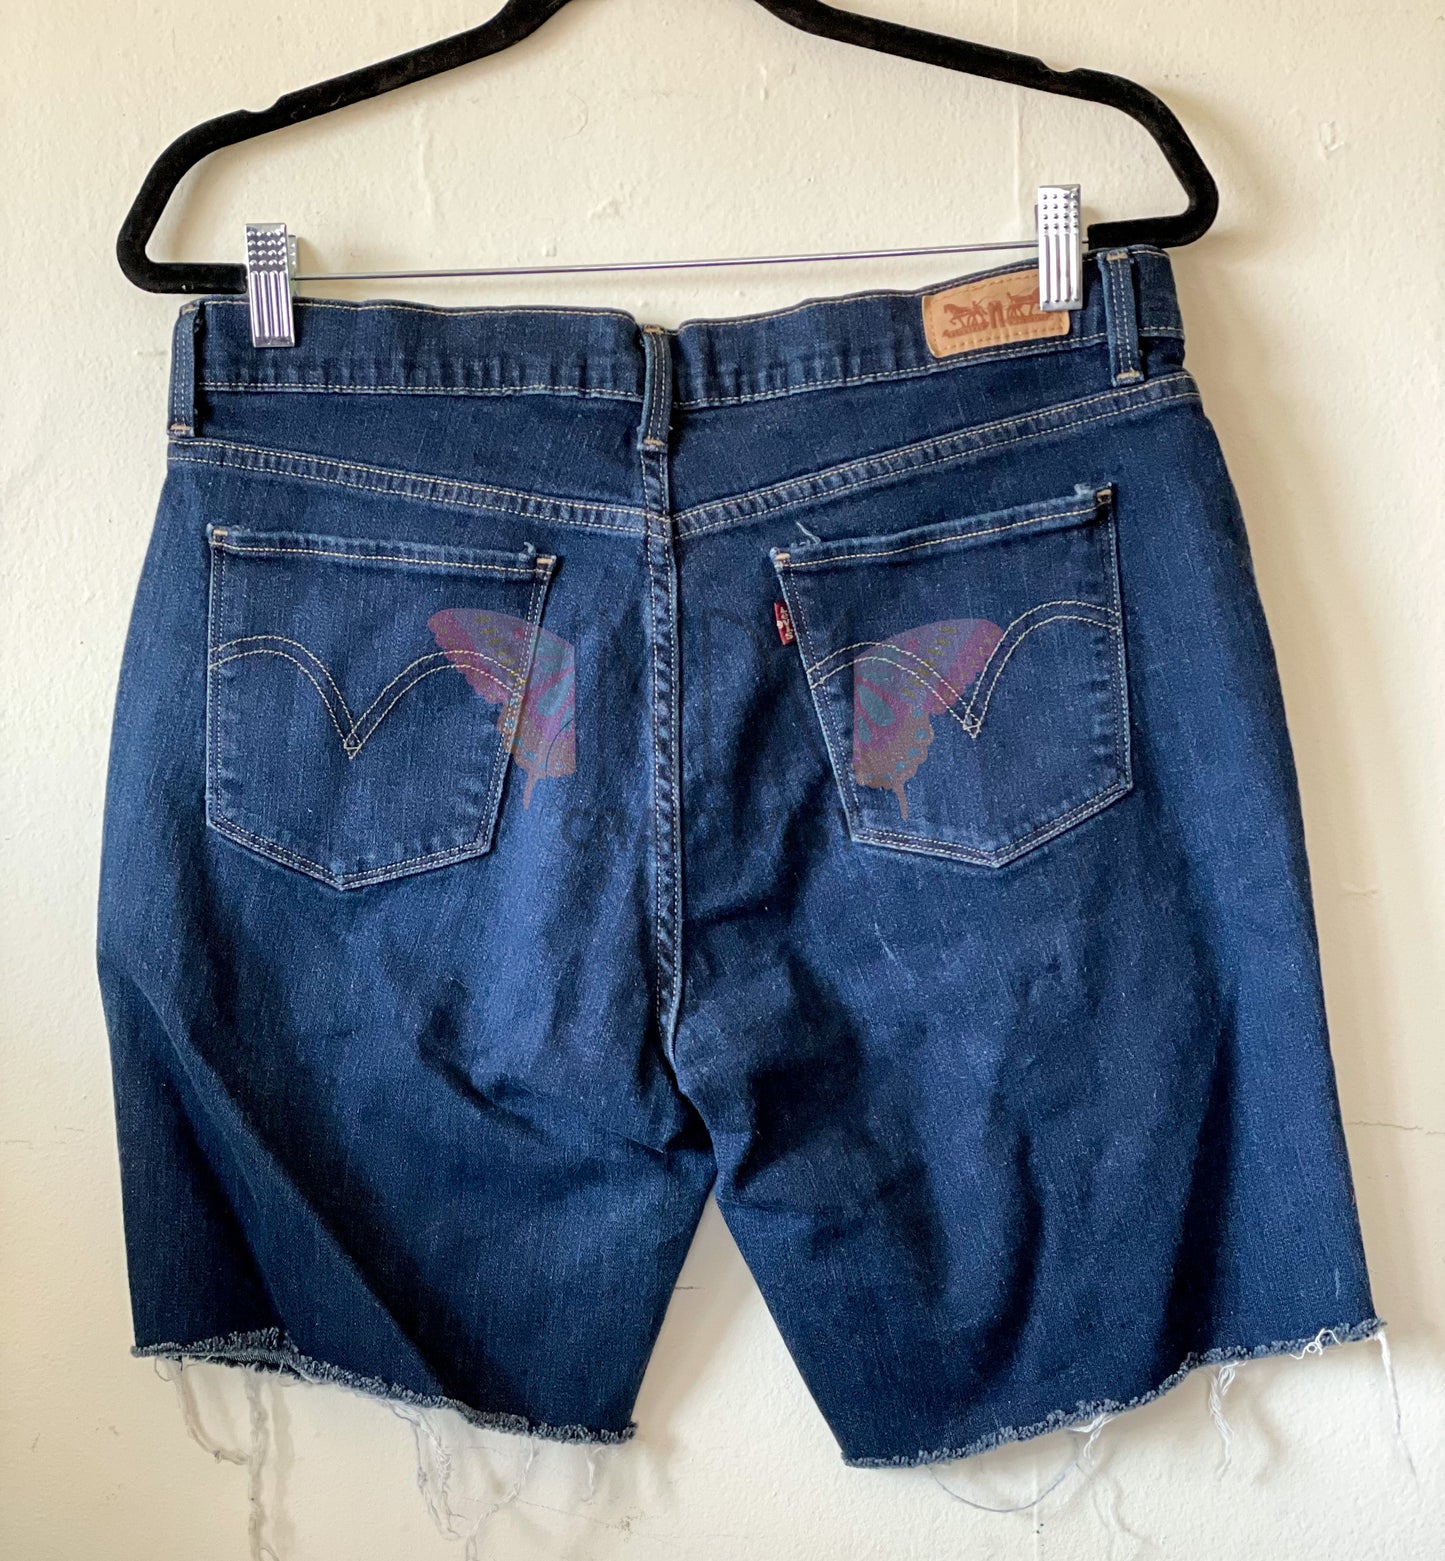 Upcycled Denim Shorts with Care Bear Hearts